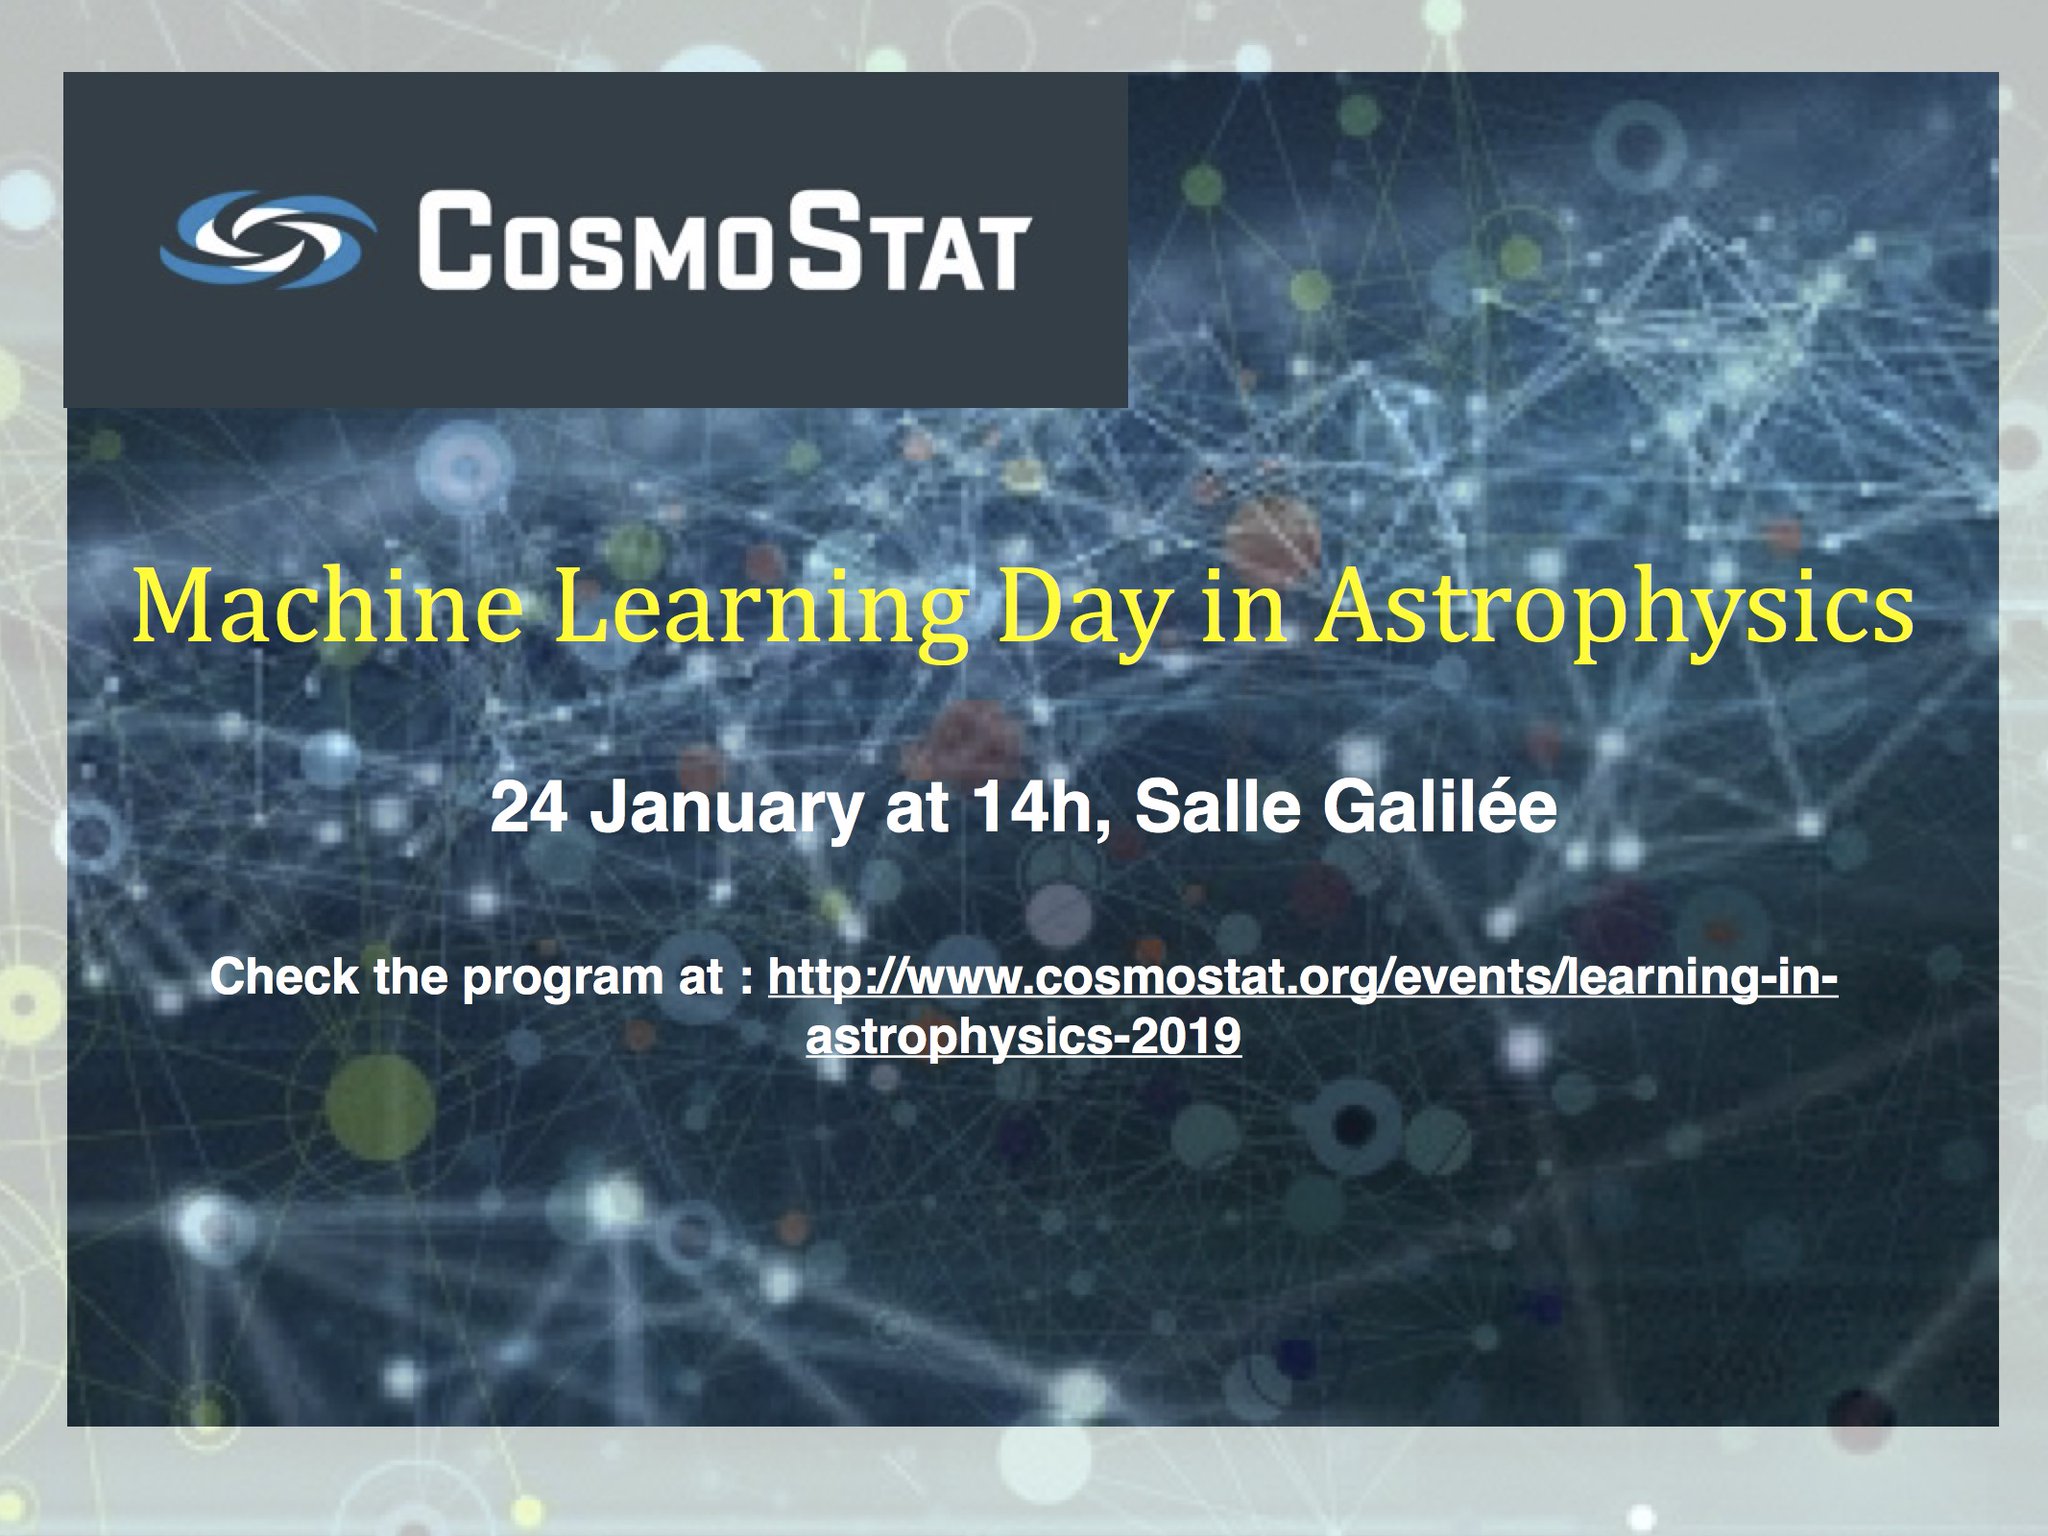 Cosmostat Day on Machine Learning in Astrophysics